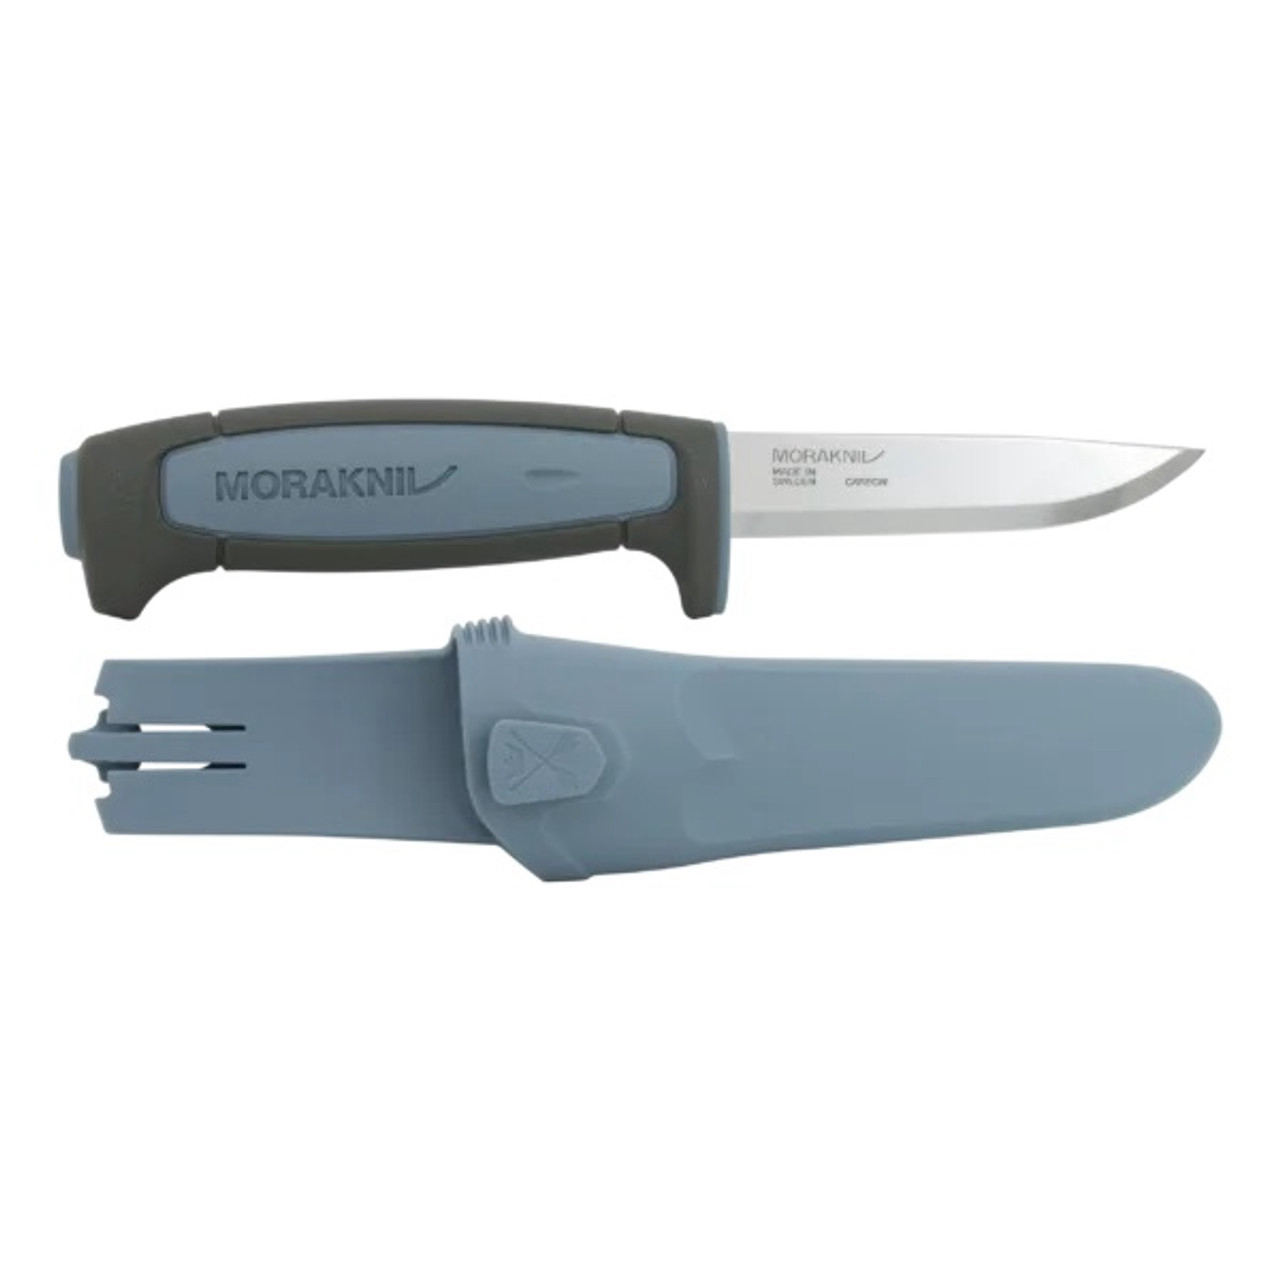 product image for Mora Basic 511 Black Carbon Steel Fixed Blade Knife